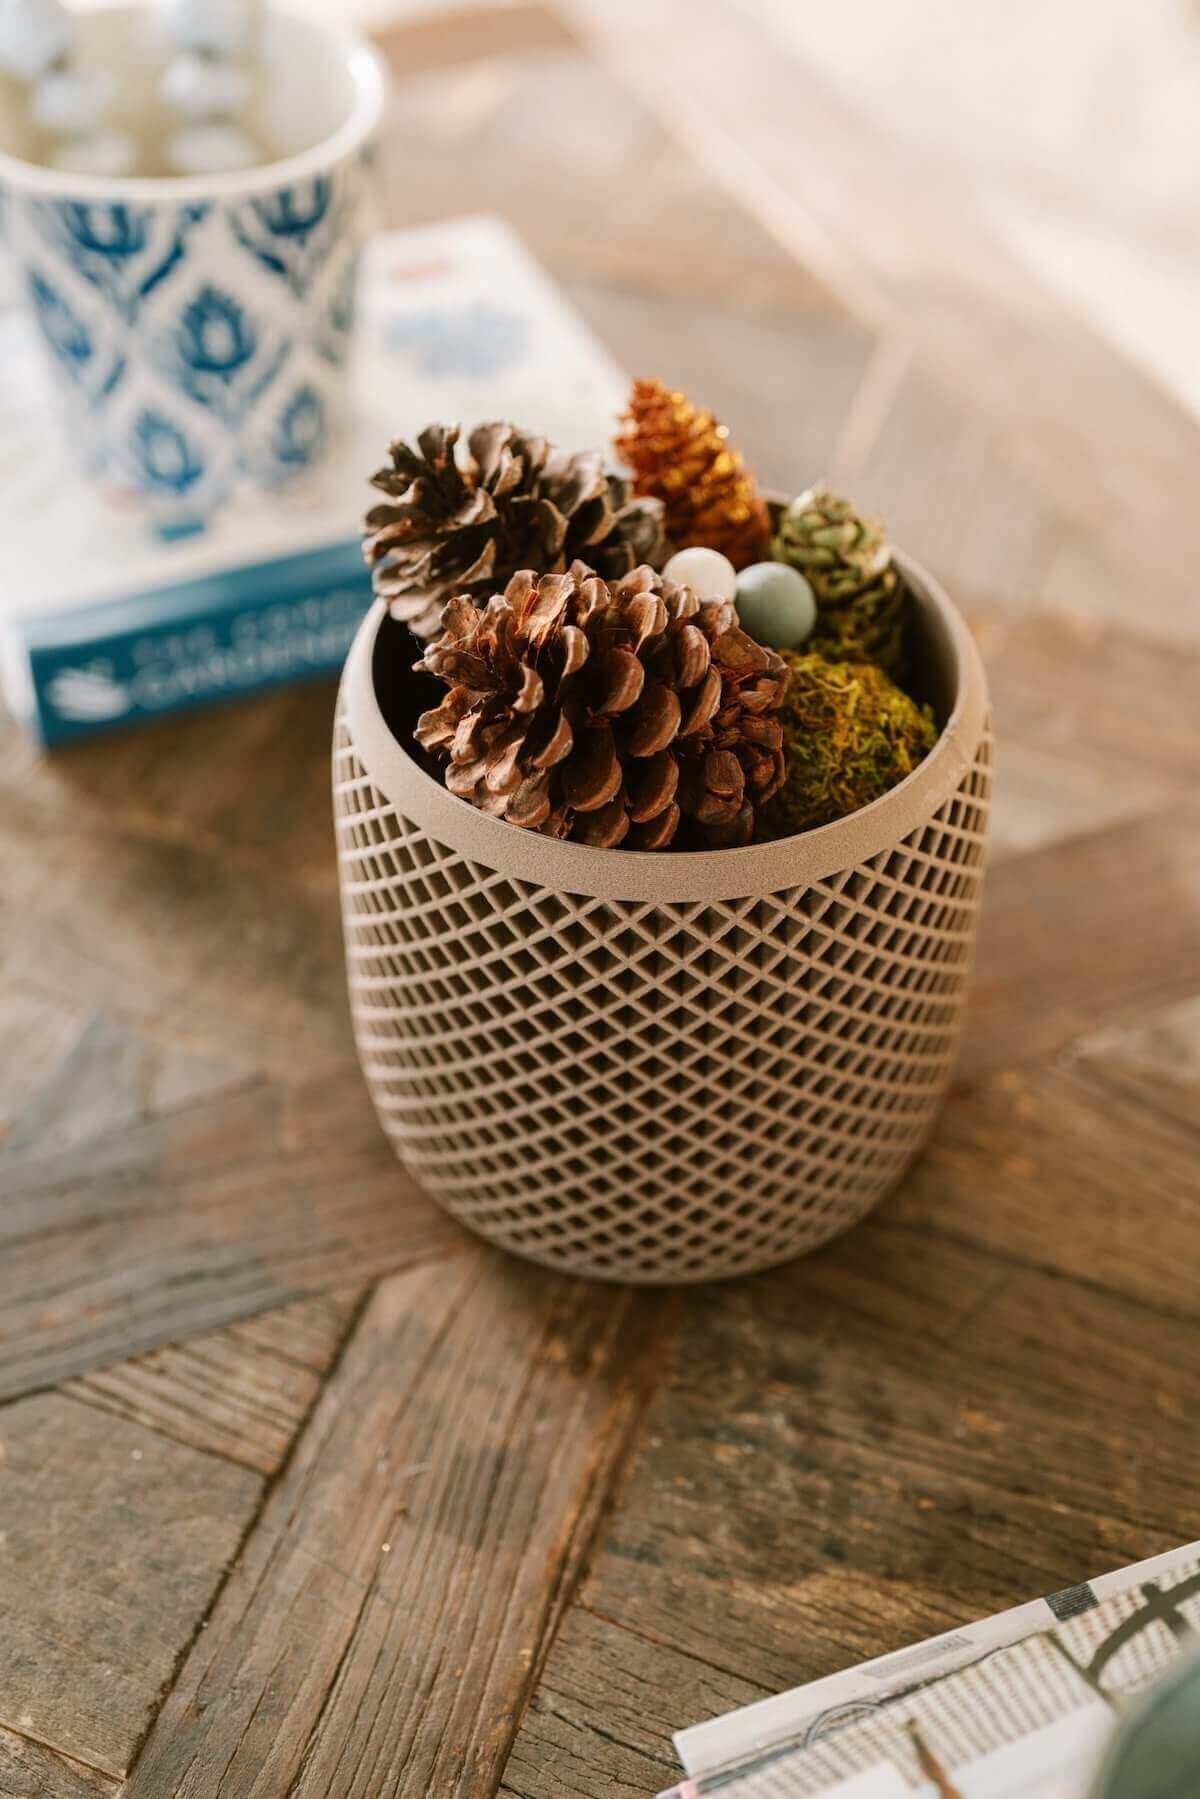 Modern planters | Unique Planters | Decor Planters, Woodland Pulse. A decor planter with pinecones inside on a coffee table.